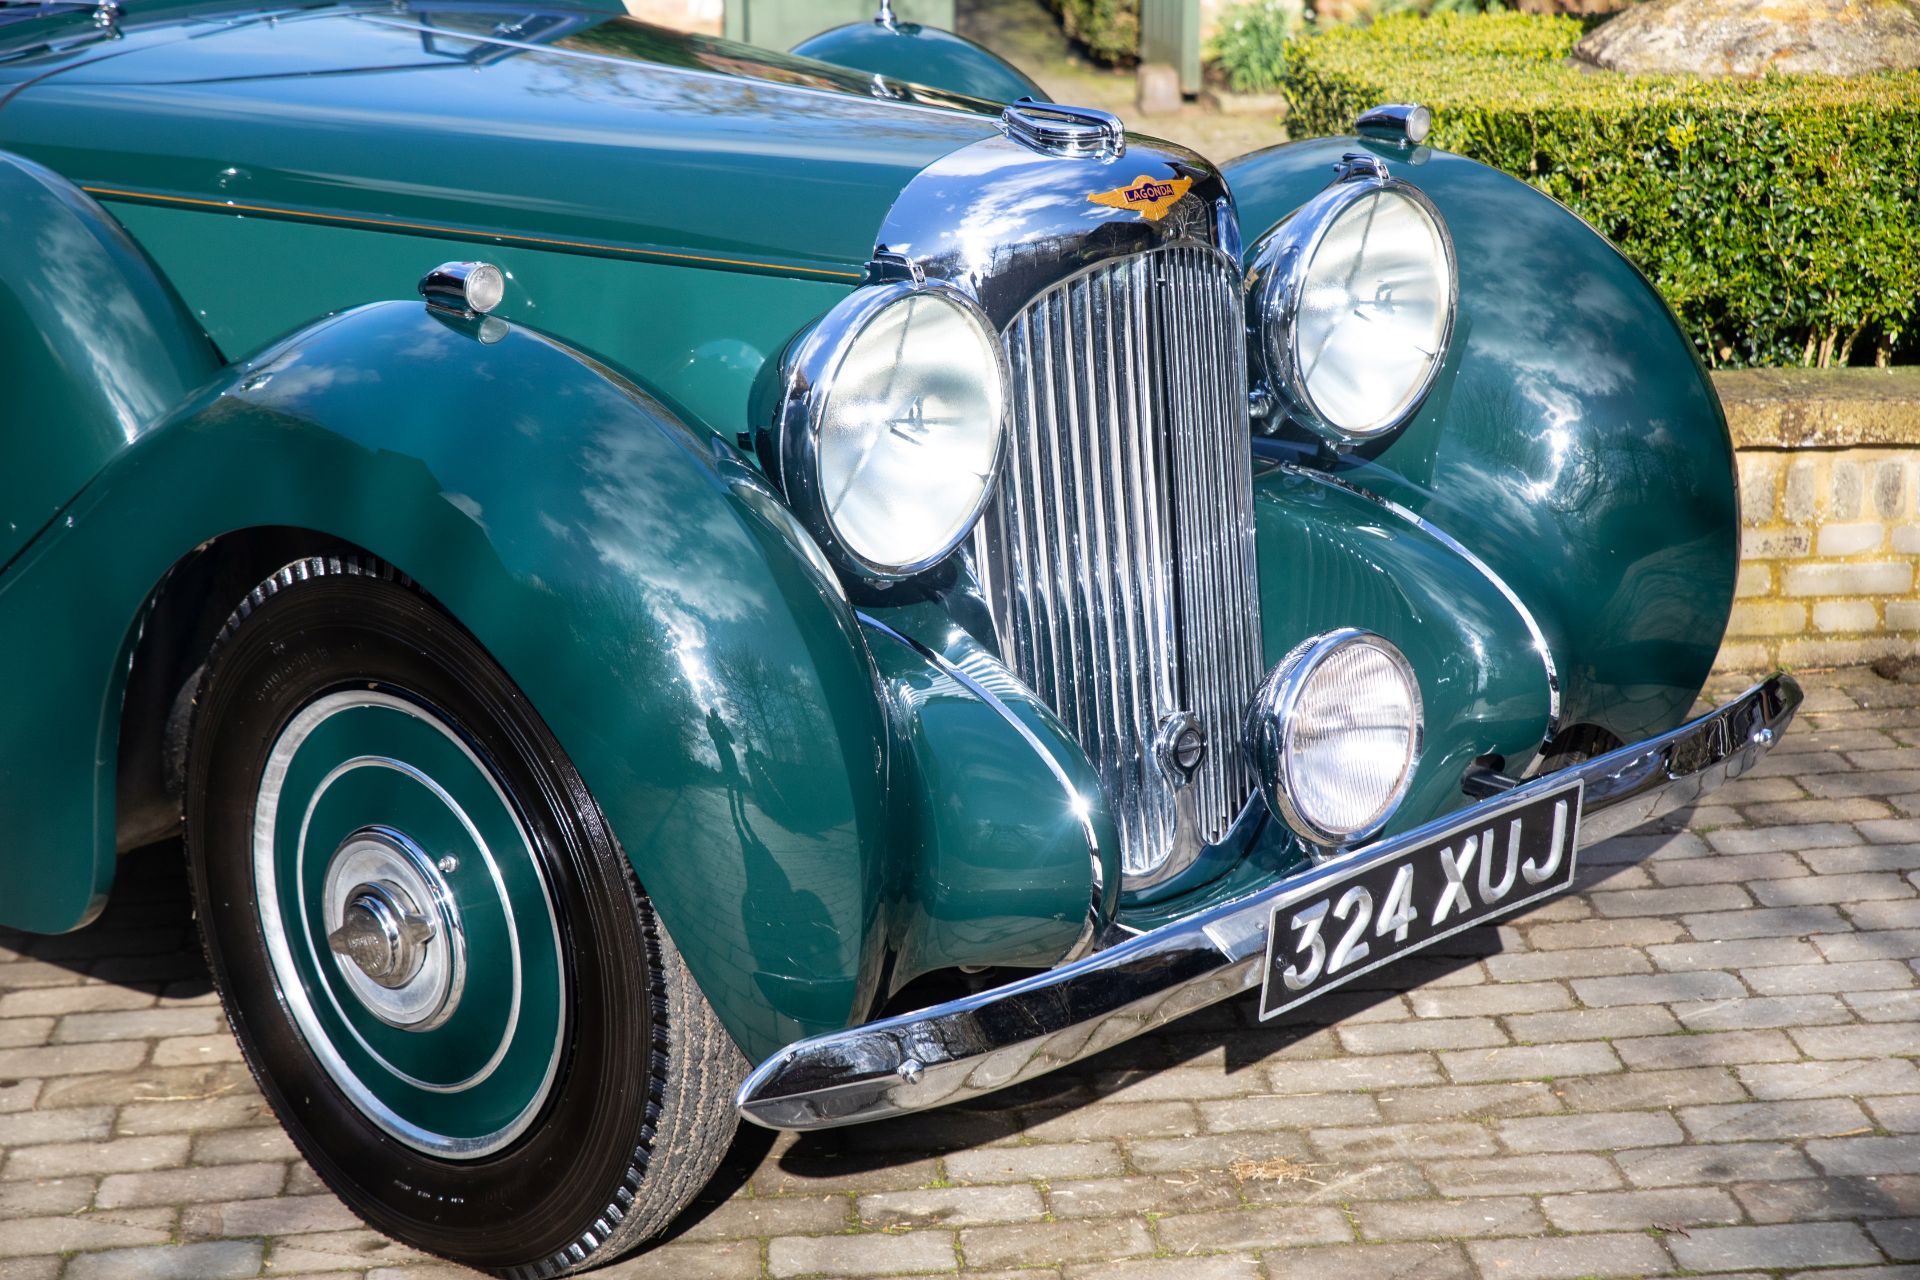 Offered from the estate of the late Michael Patrick Aiken, MBE,1939 Lagonda V12 Drophead Coupé C... - Bild 7 aus 64